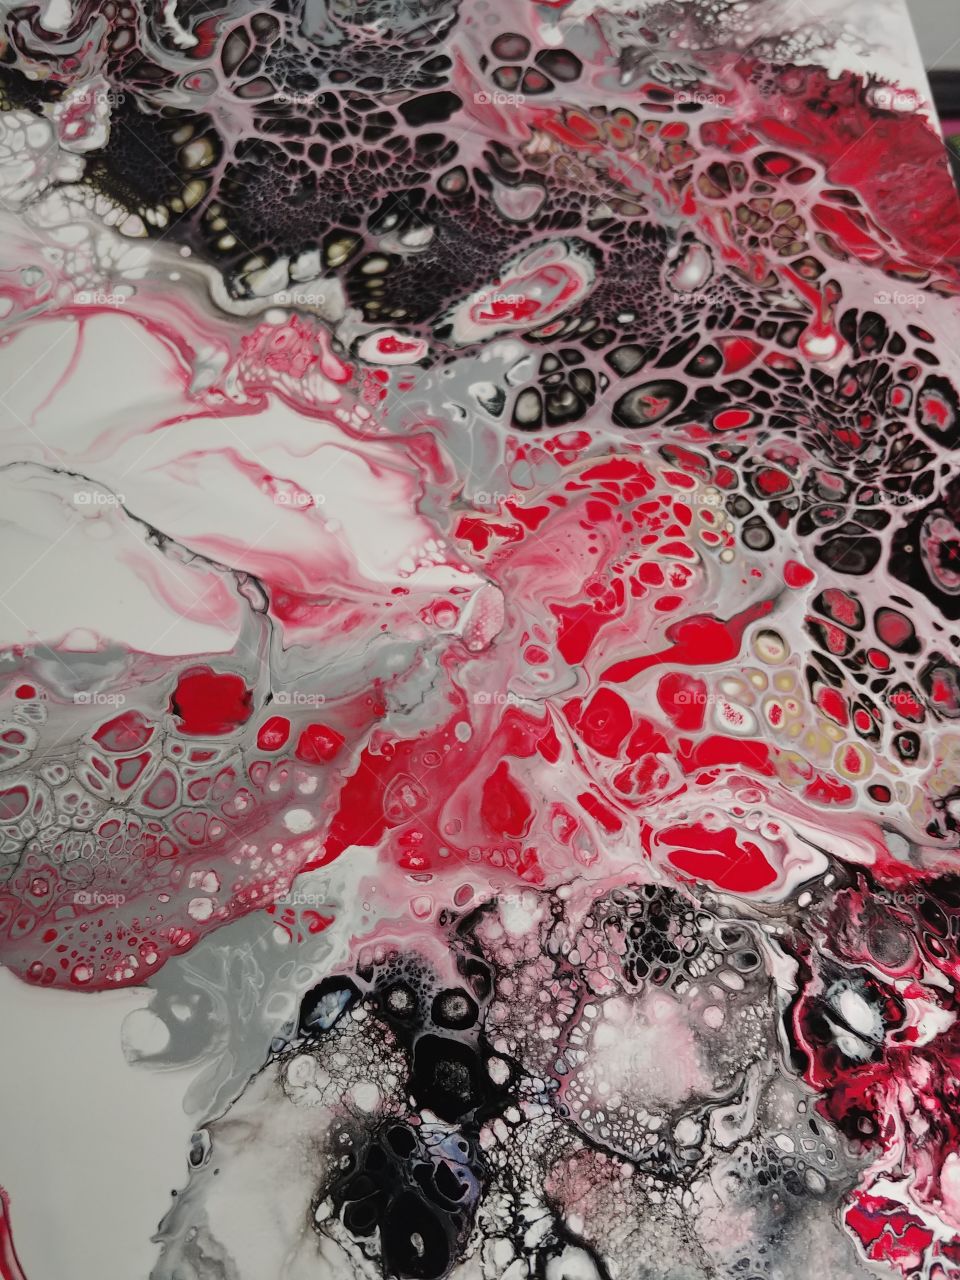 black and red abstract art desgins. alot of cells and swirls and the colors just pop!